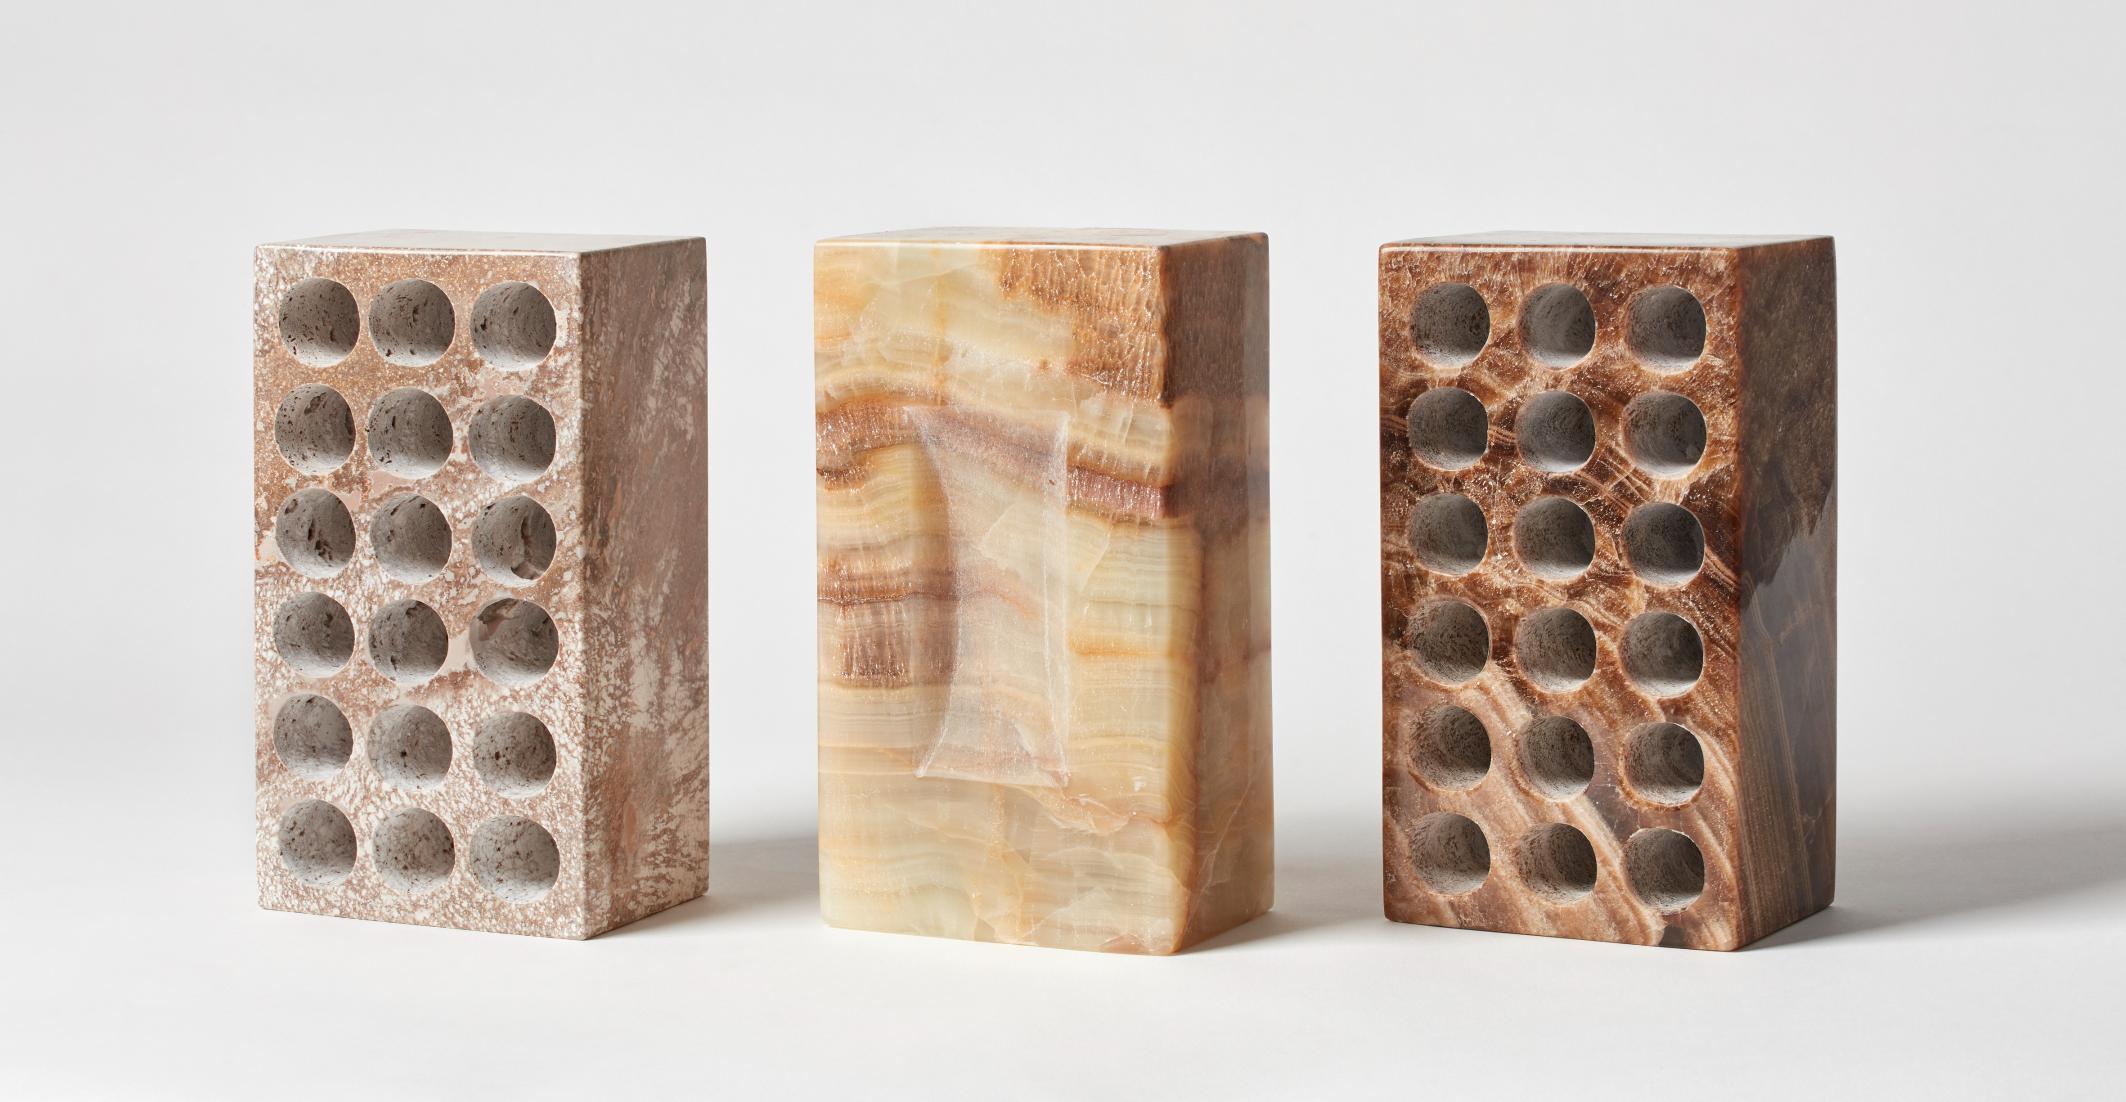 Set of 3 bricks by Estudio Rafael Freyre
Dimensions: W 12.5 D 9 x H 23 cm 
Materials: Andes Stones
Also available: Other finishes available

The brick is a generic constructive element that constitutes part of the urban imaginary. In Peru,